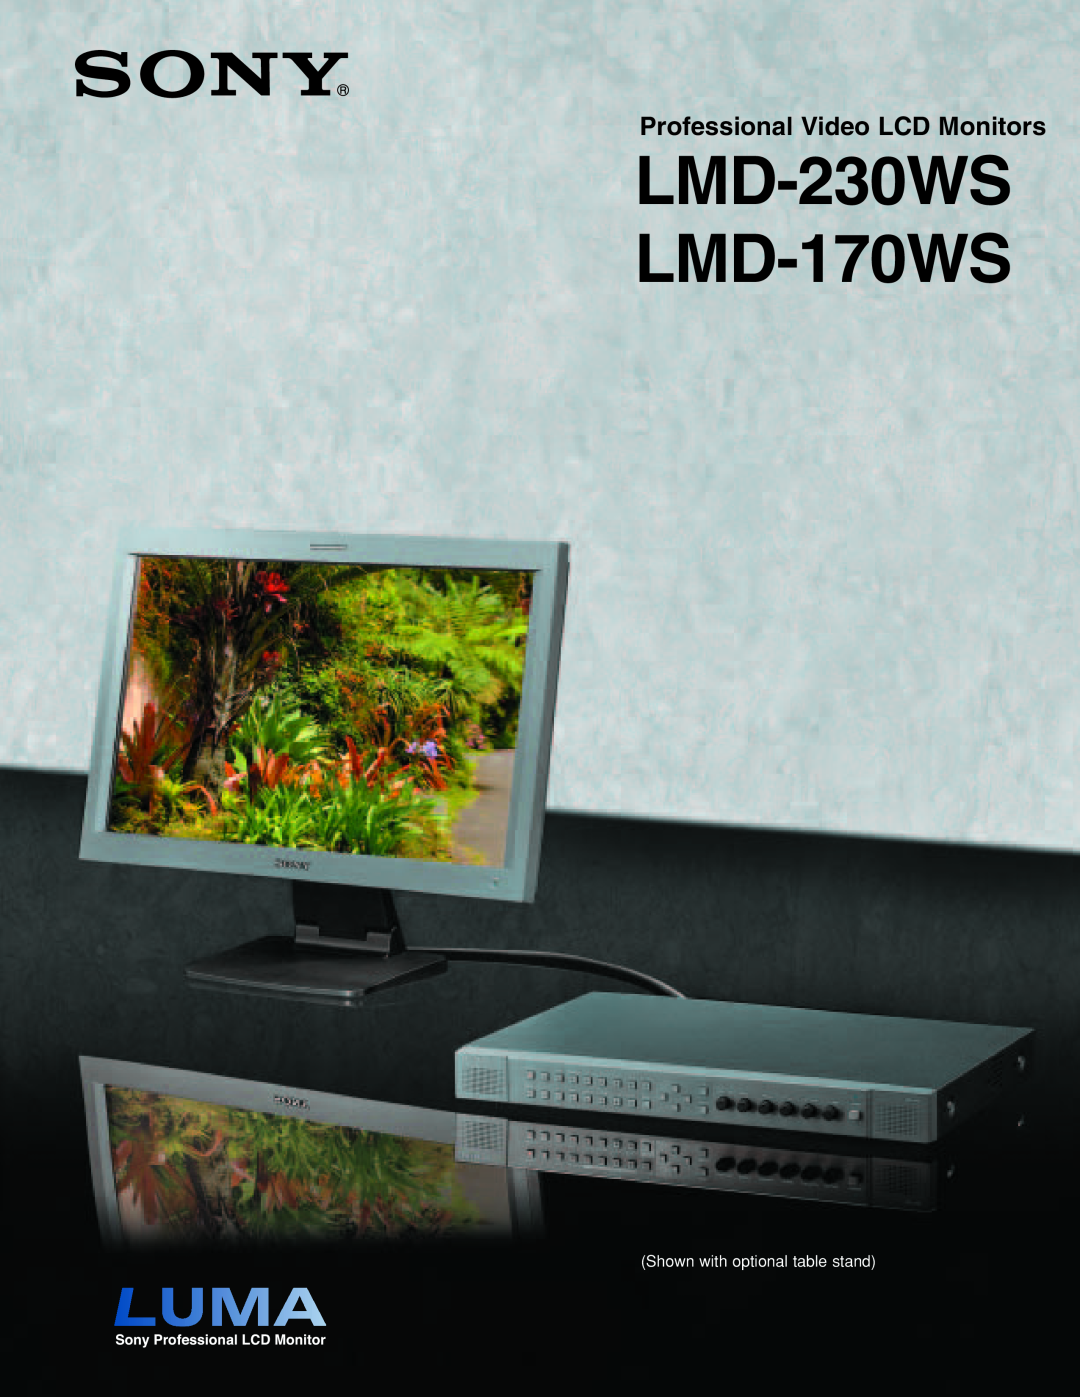 Sony manual LMD-230WS LMD-170WS, Professional Video LCD Monitors, Shown with optional table stand 